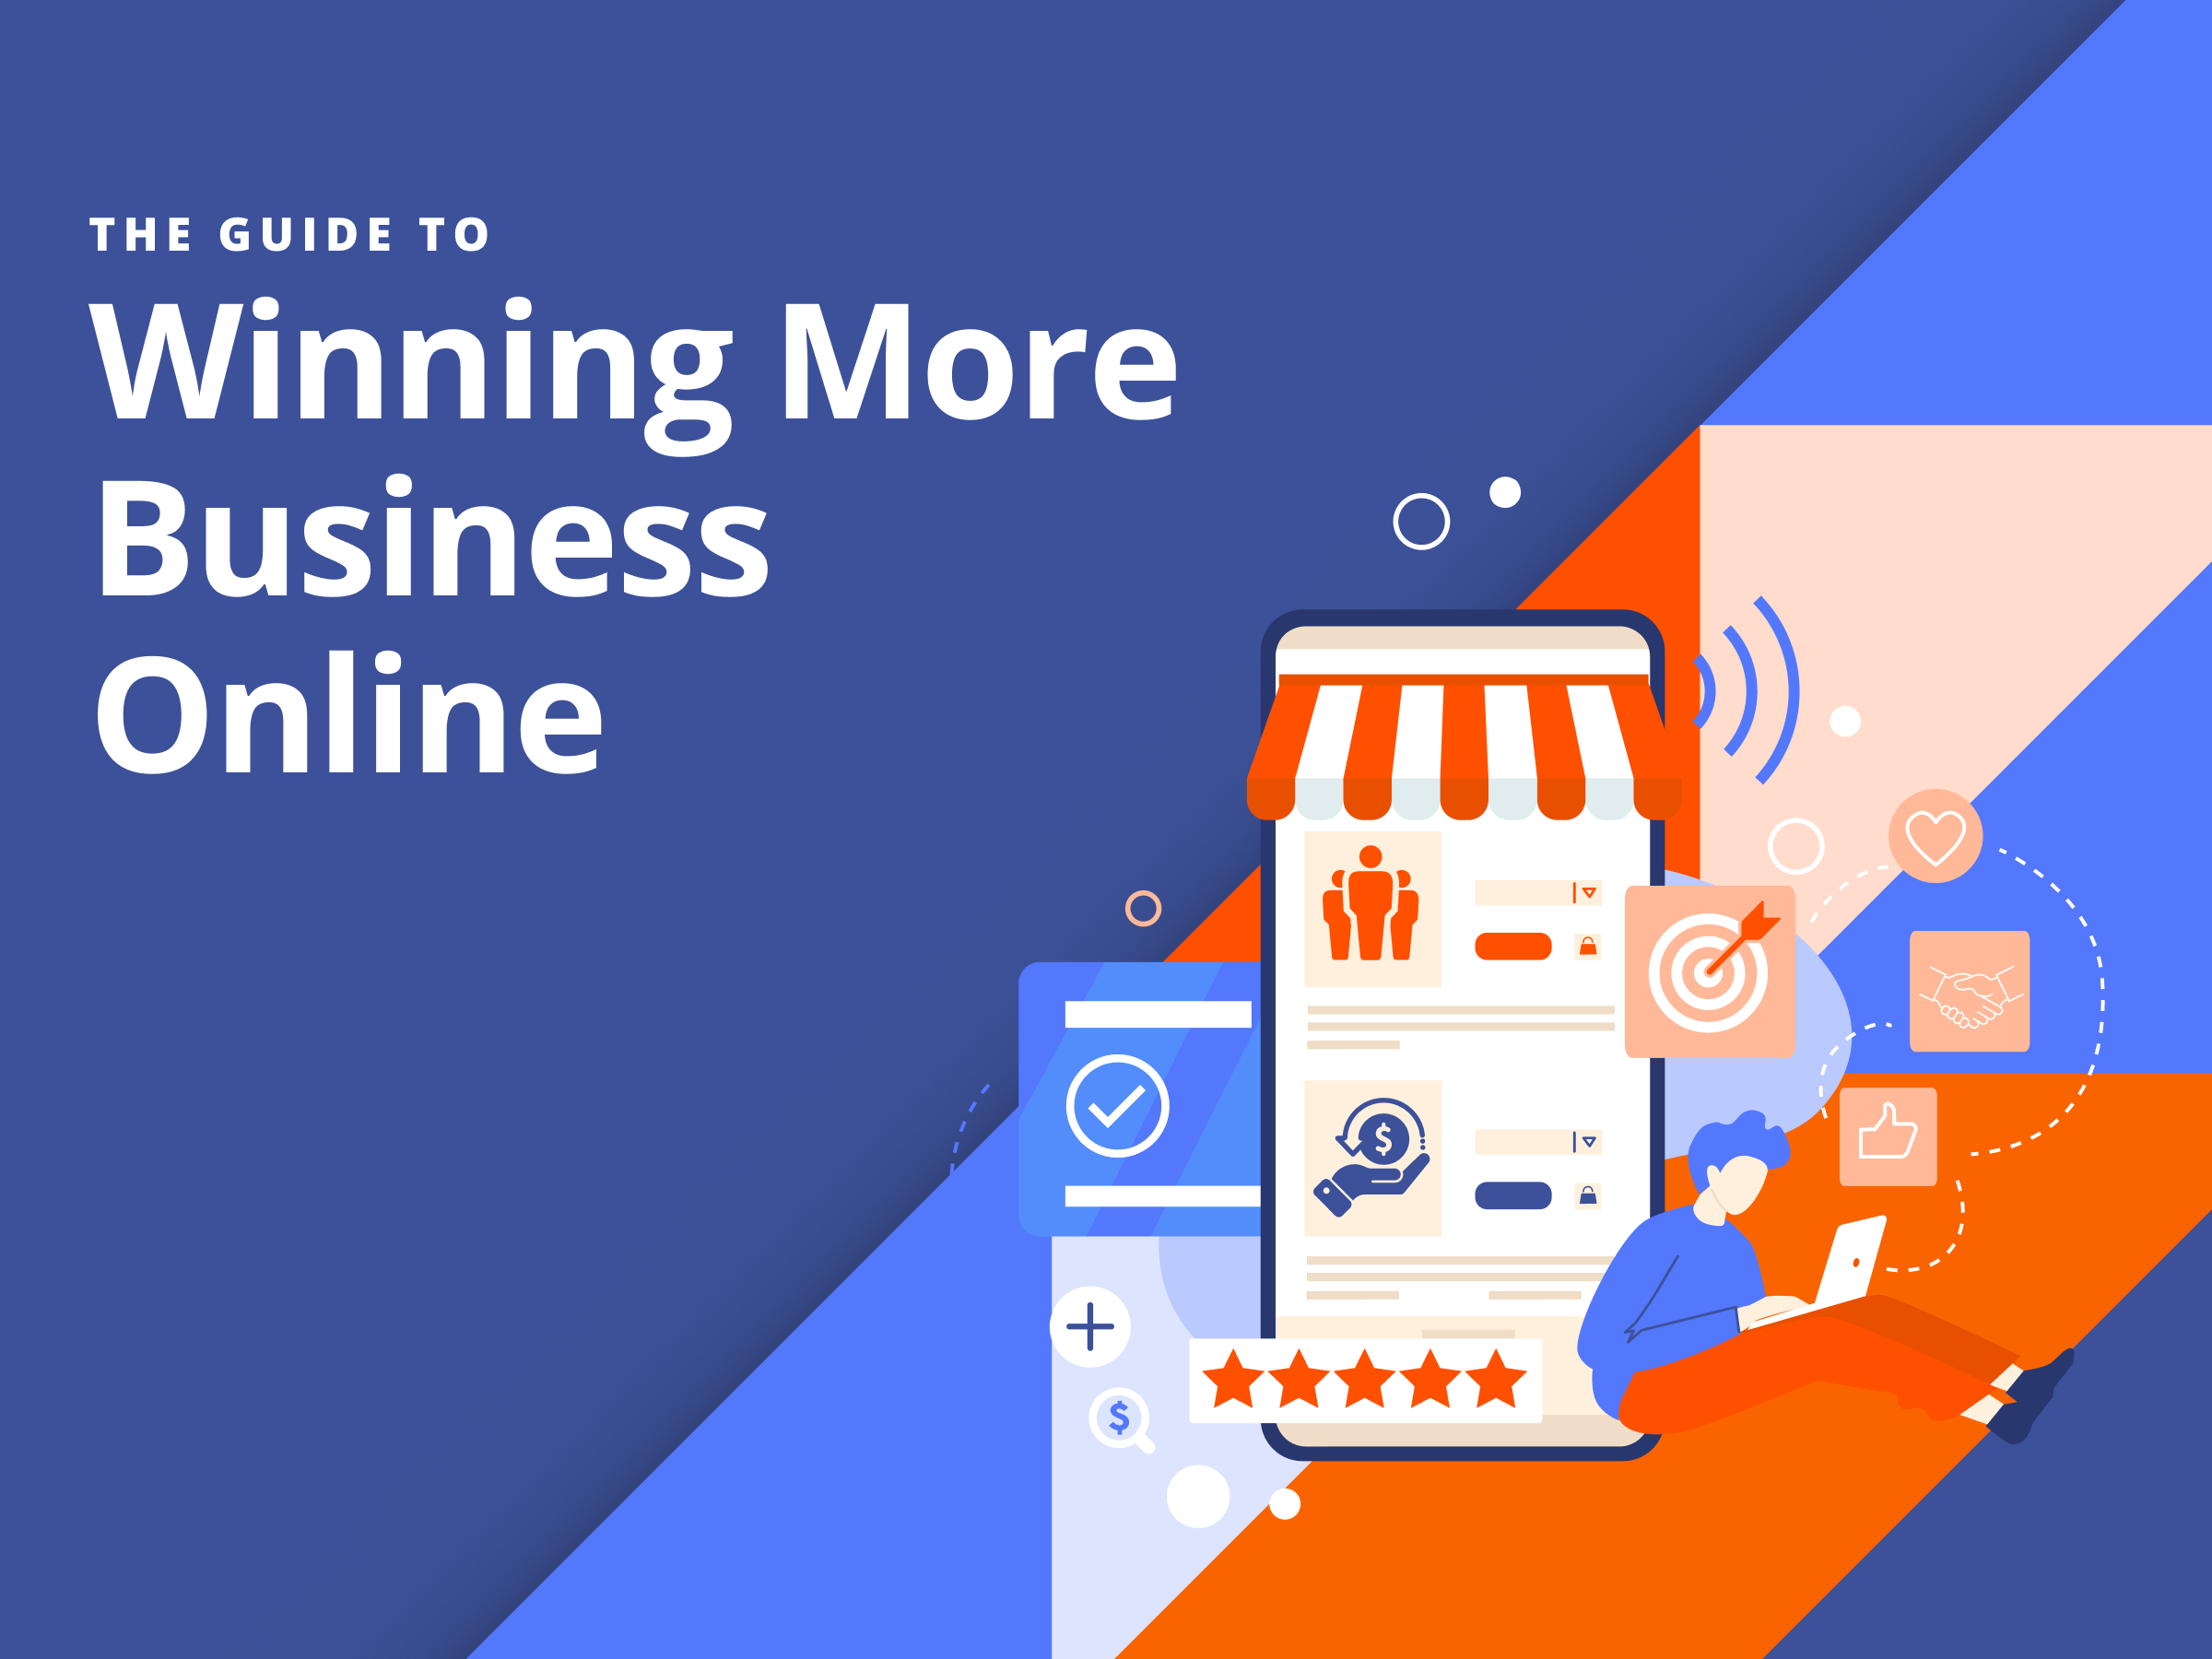 The Guide to Winning More Business Online